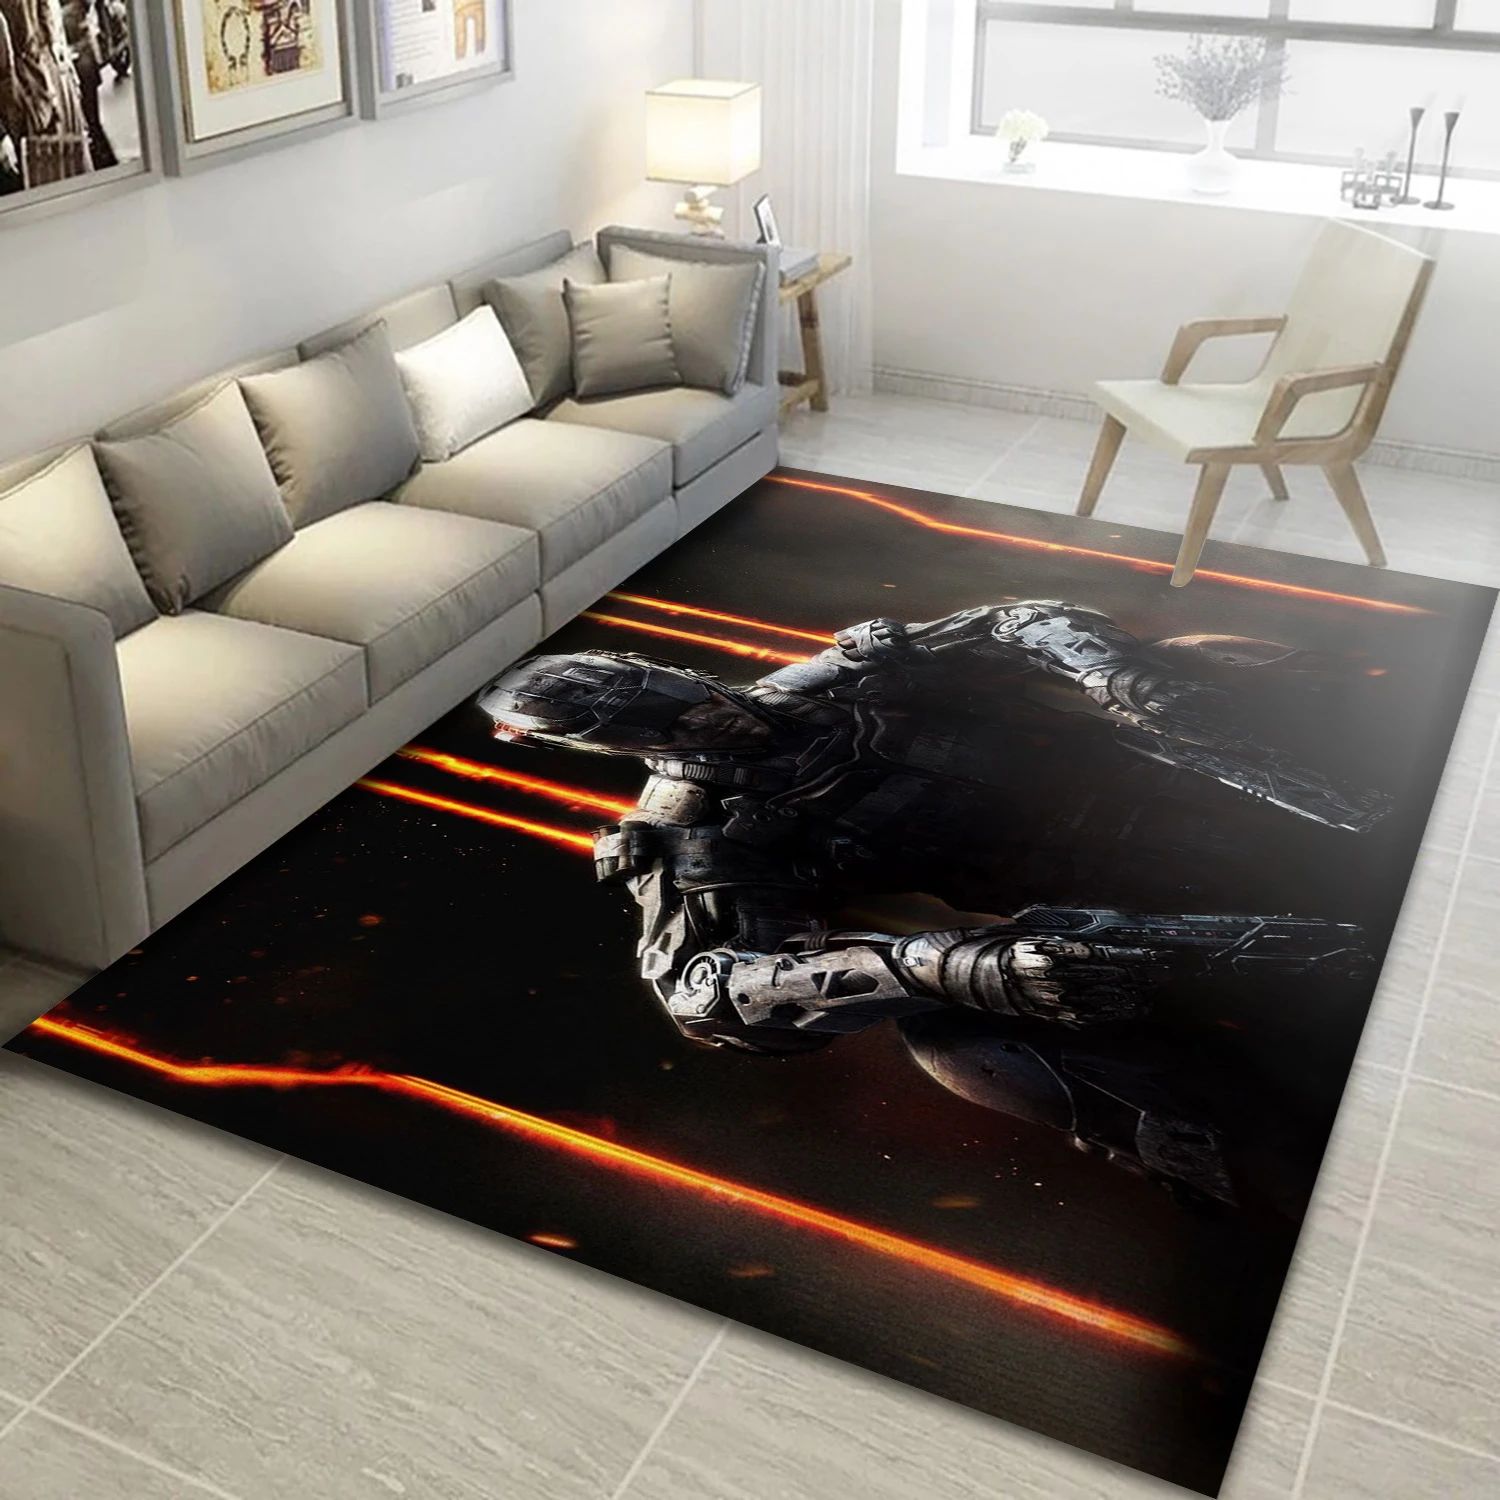 Call Of Duty Black Ops Iii Video Game Area Rug Area, Living Room Rug - Christmas Gift Decor - Indoor Outdoor Rugs 2